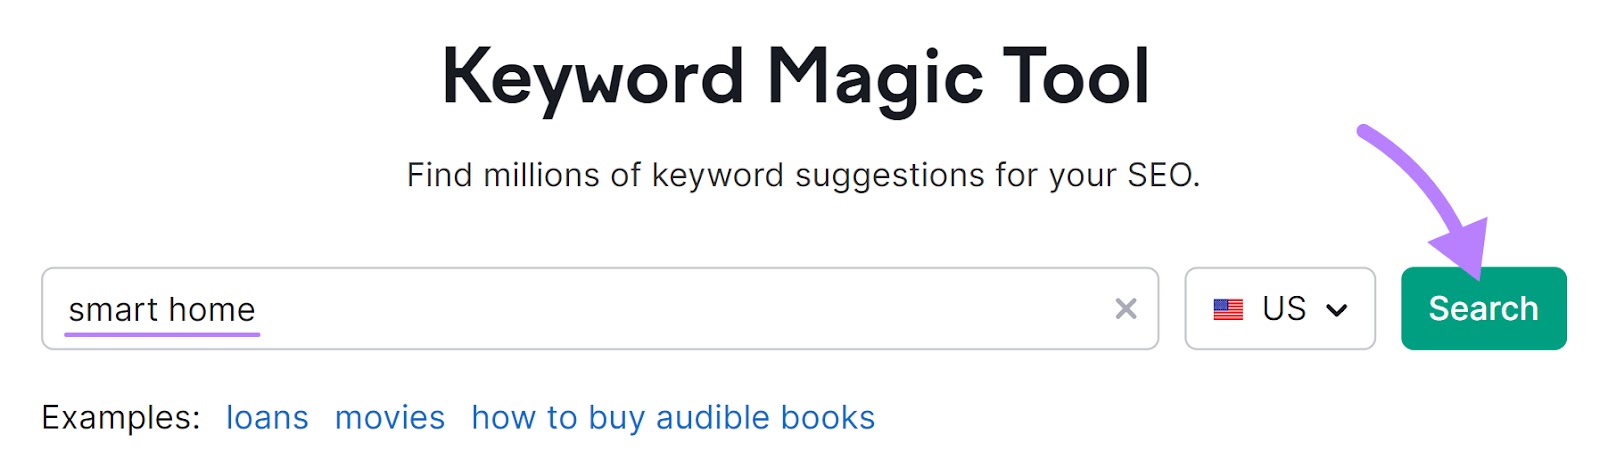 "smart home" entered into the Keyword Magic Tool search bar